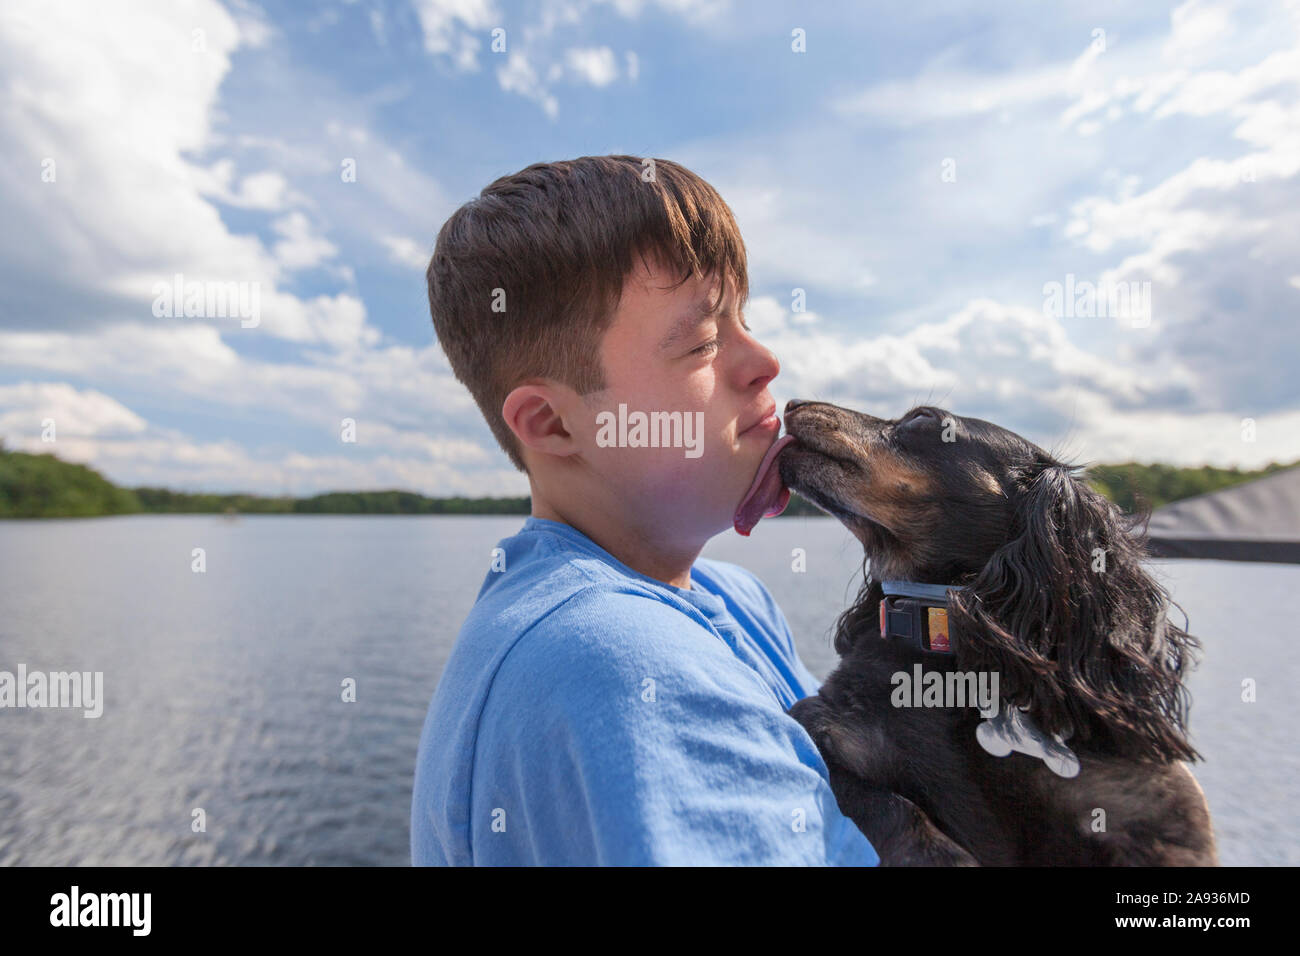 Young man with Down Syndrome playing with a dog on a dock Stock Photo